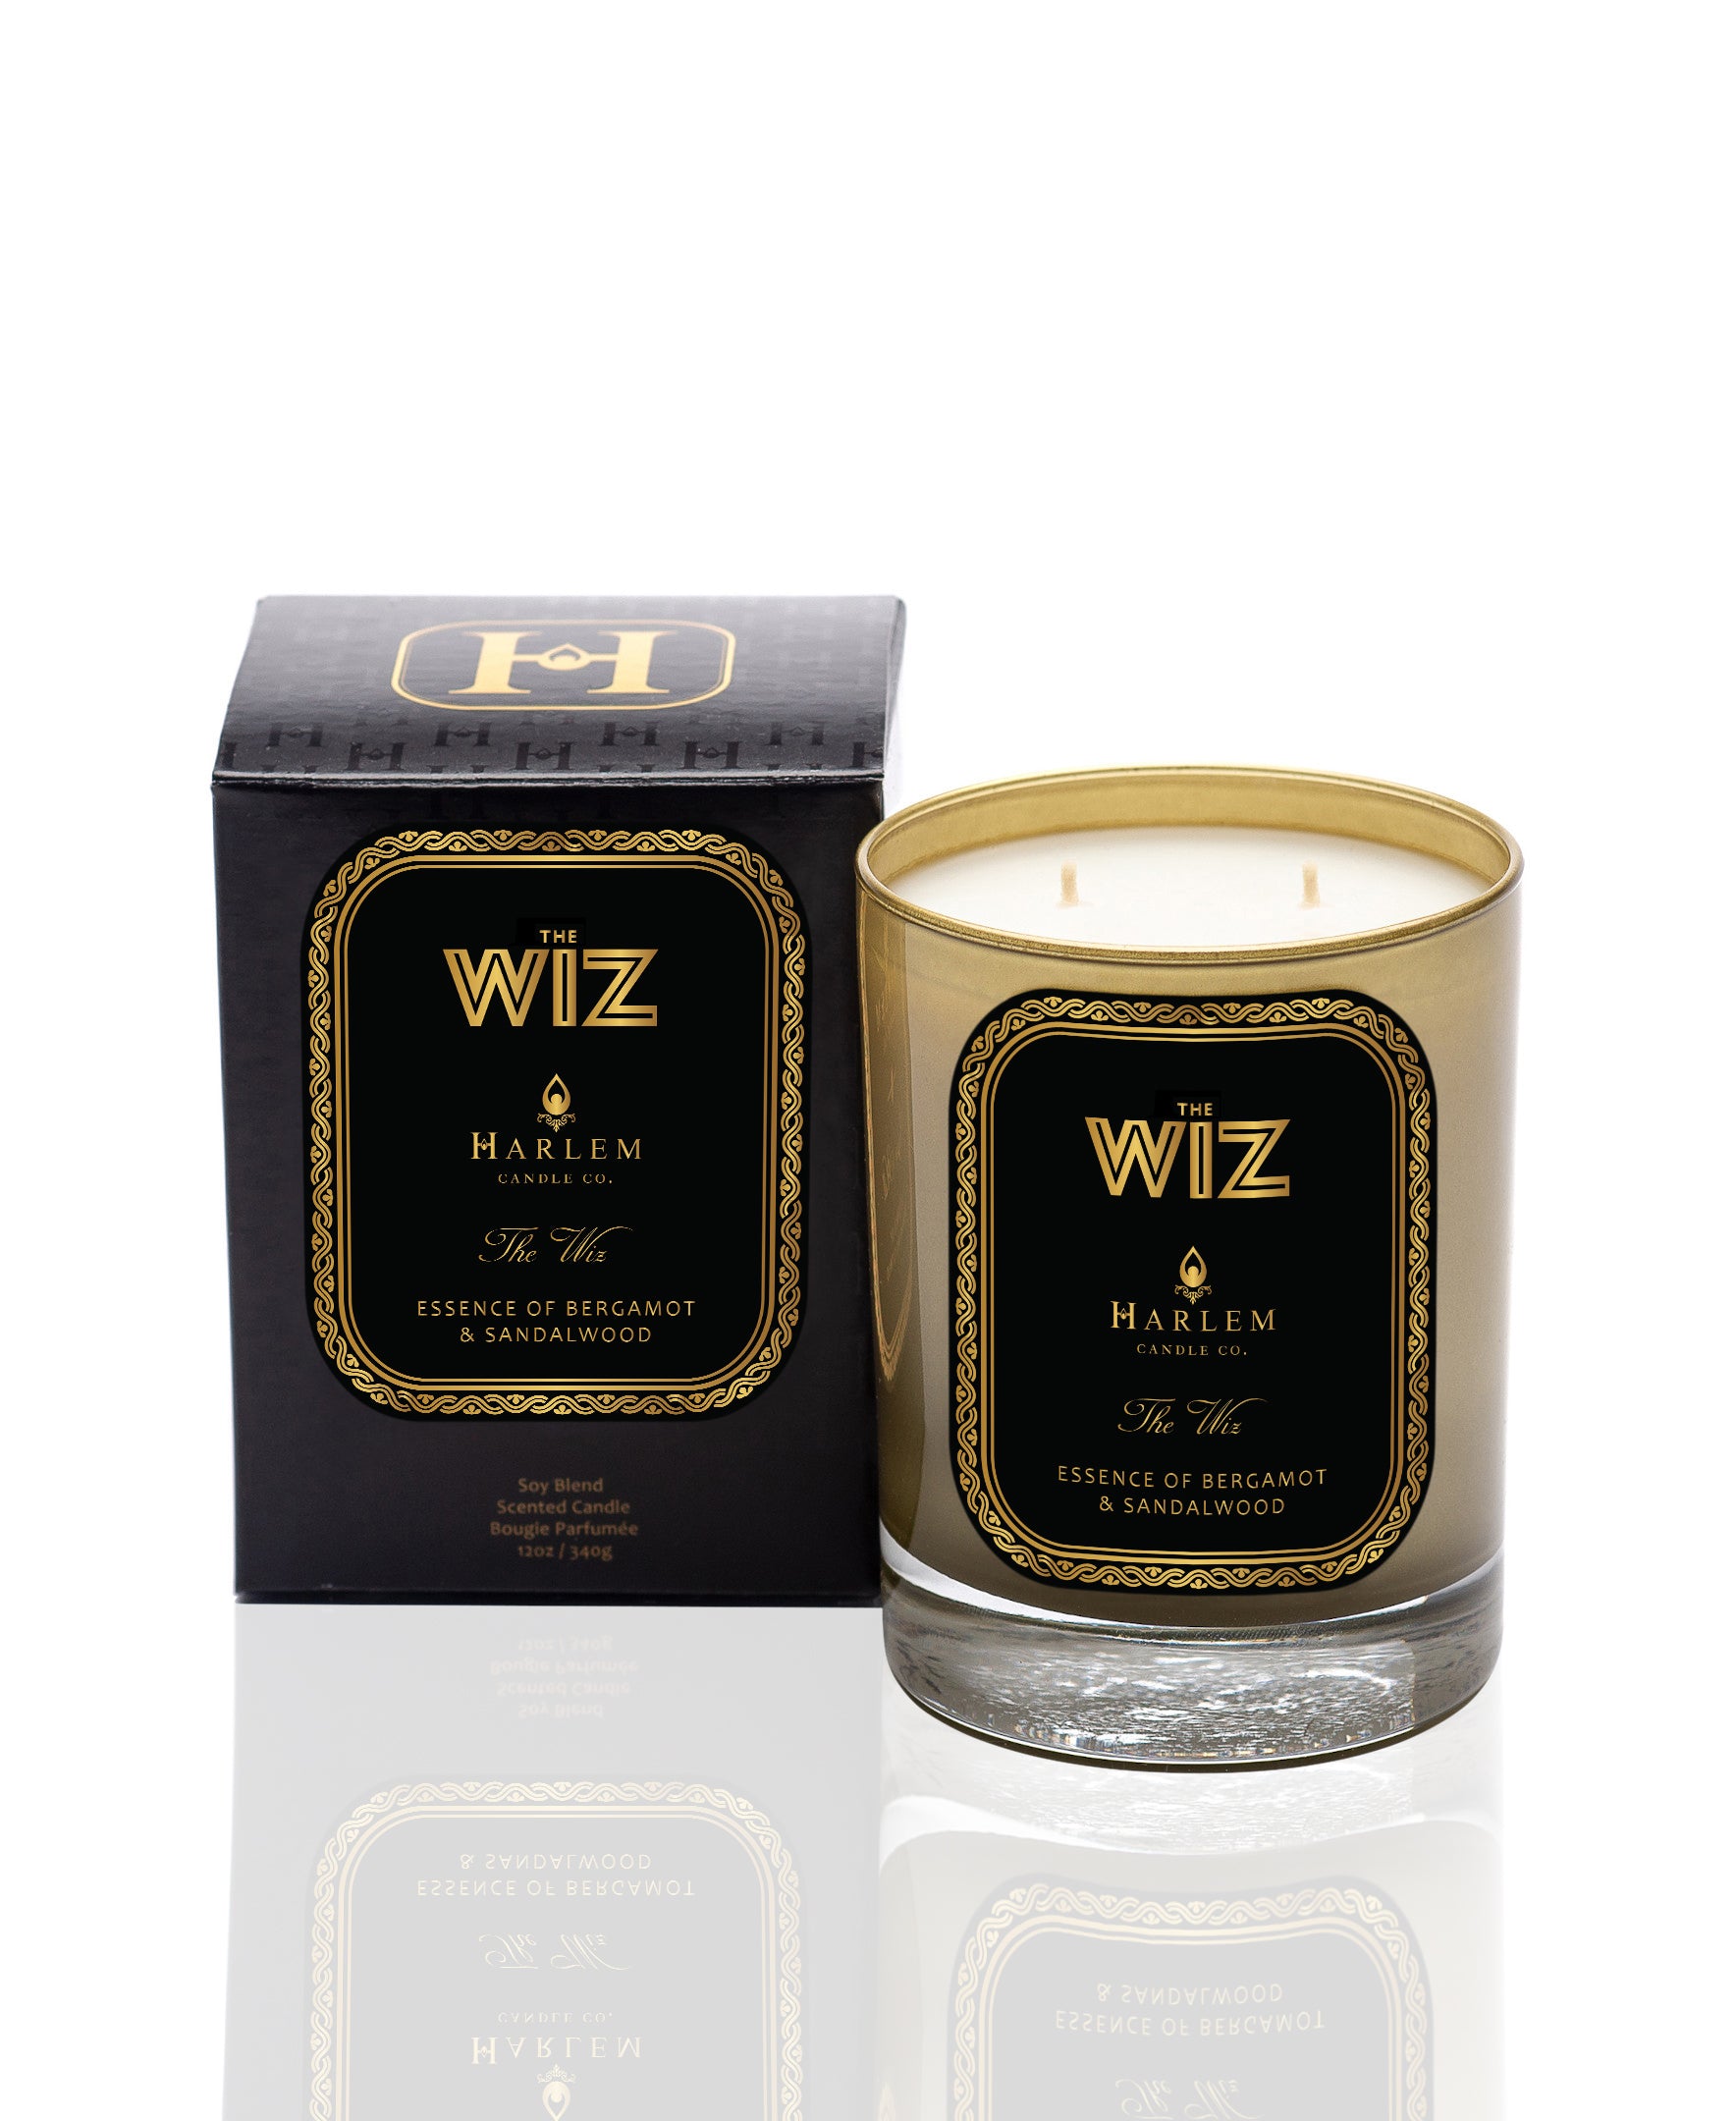 This is an image of the wiz candle with a black and gold label pictured next to its black and gold decorative box